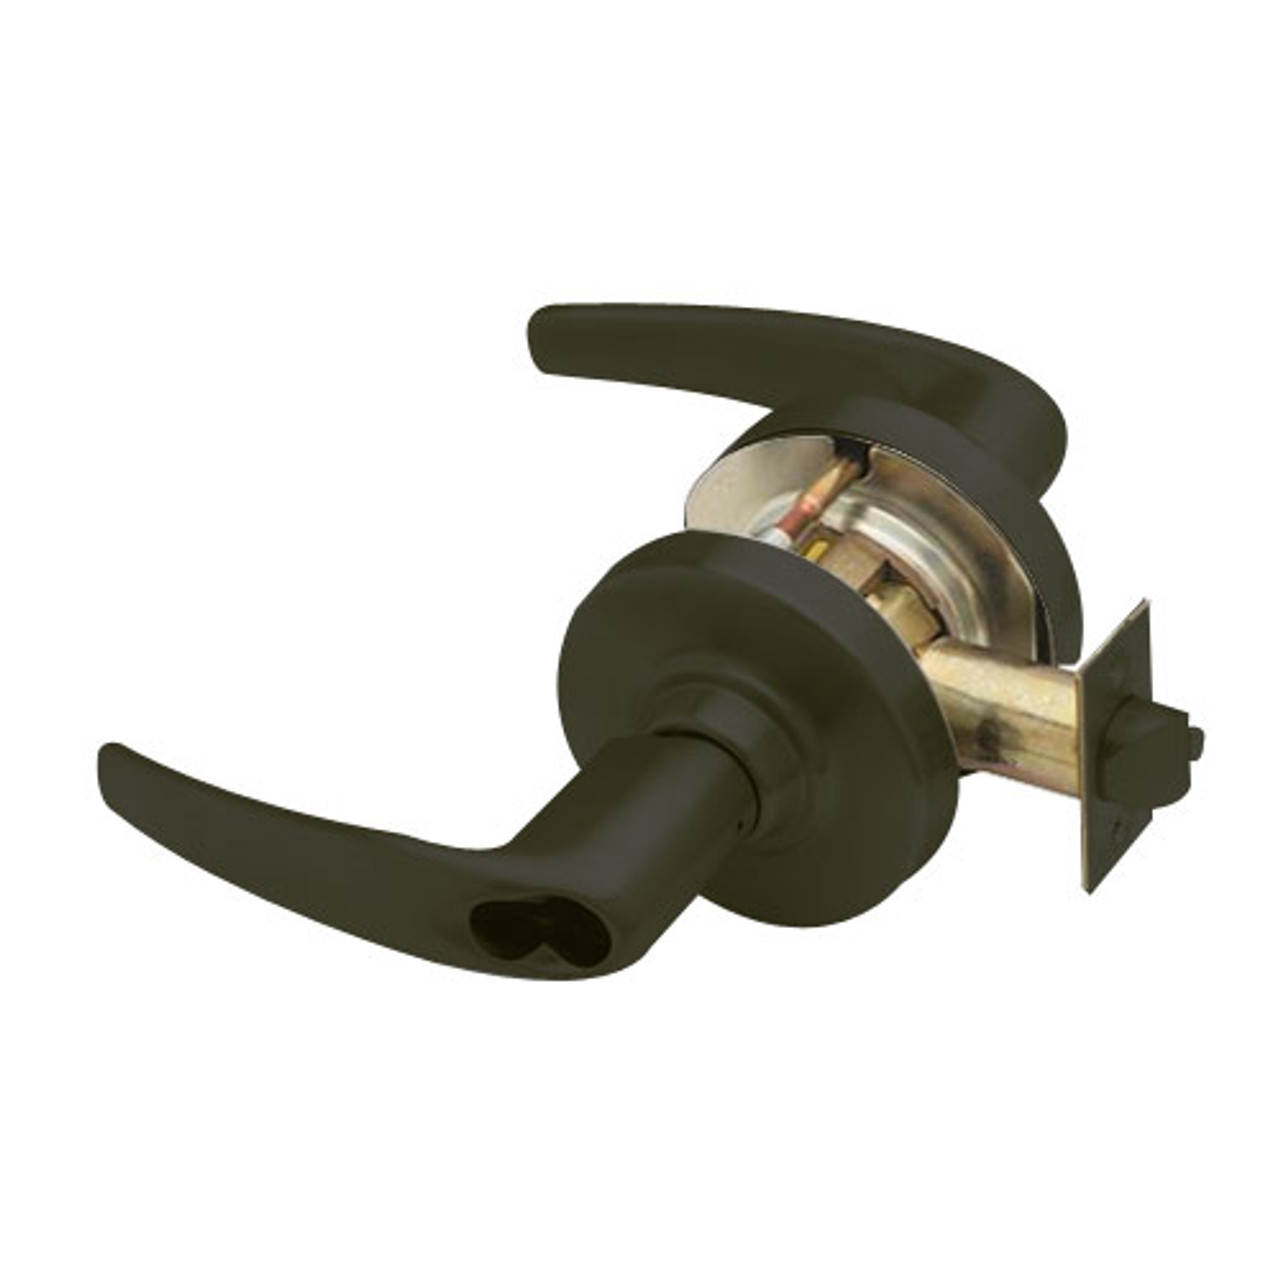 ND75JD-ATH-613 Schlage Athens Cylindrical Lock in Oil Rubbed Bronze